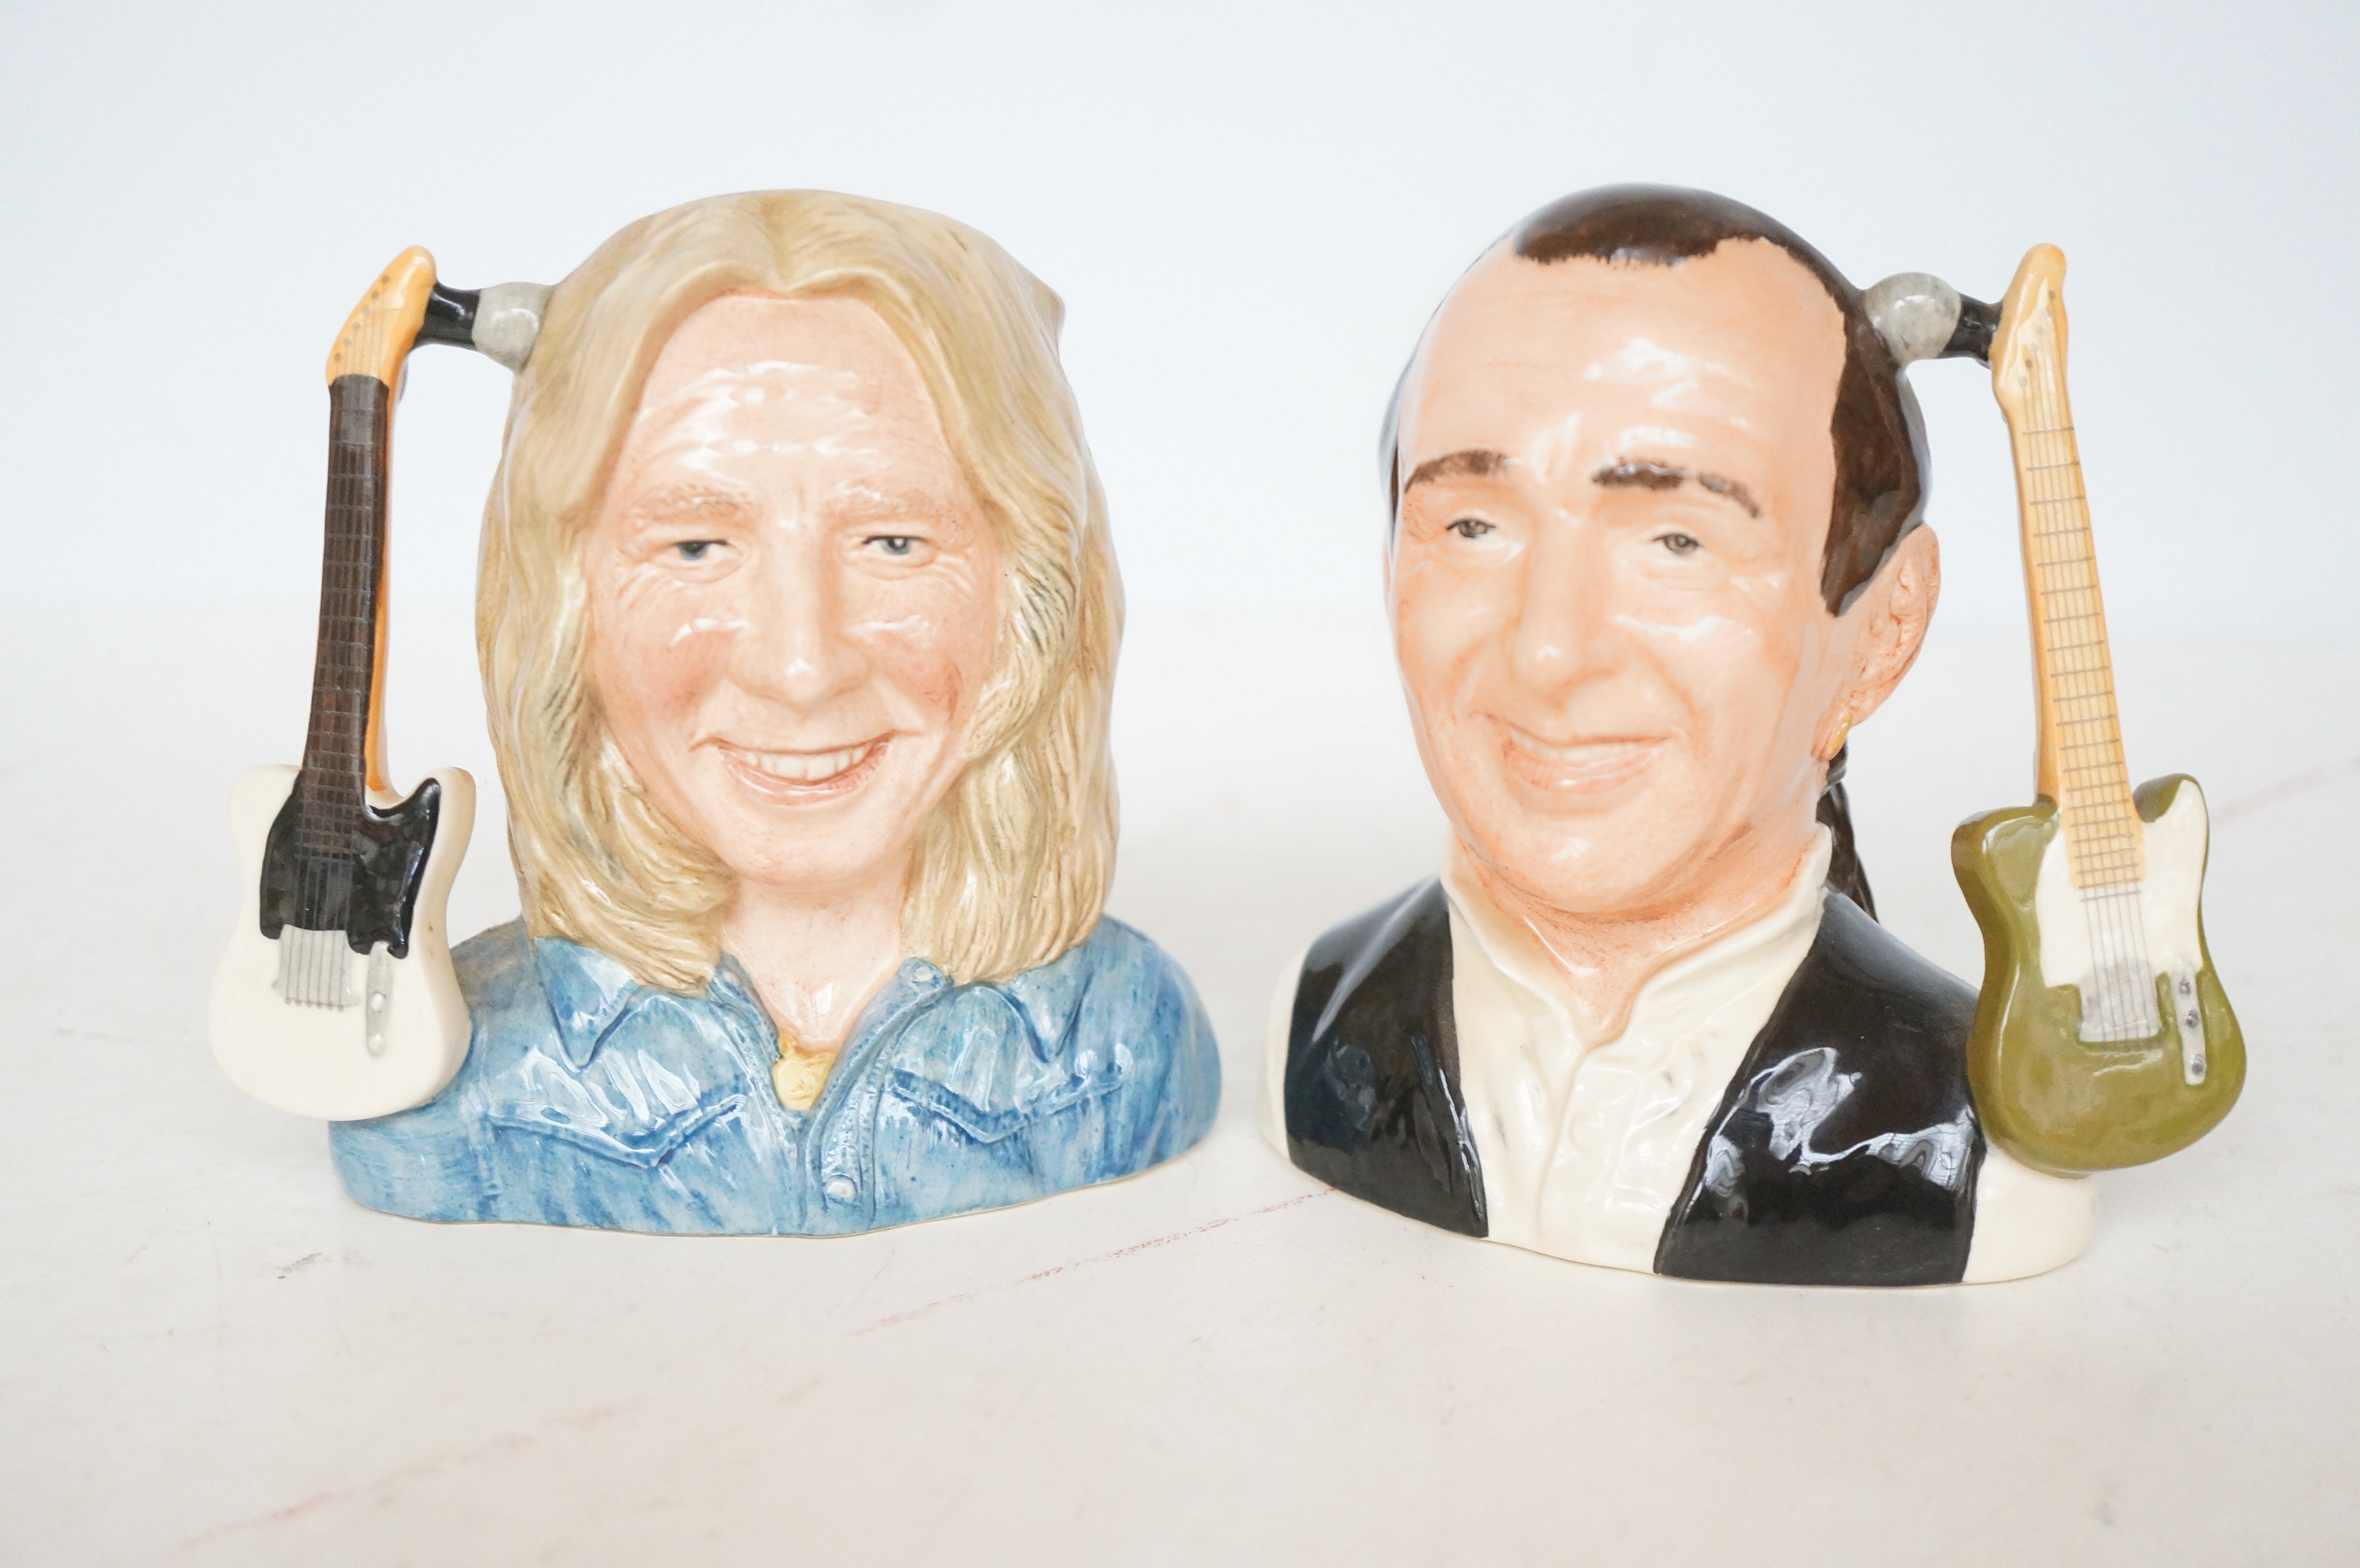 Royal Doulton status quo toby jugs limited edition